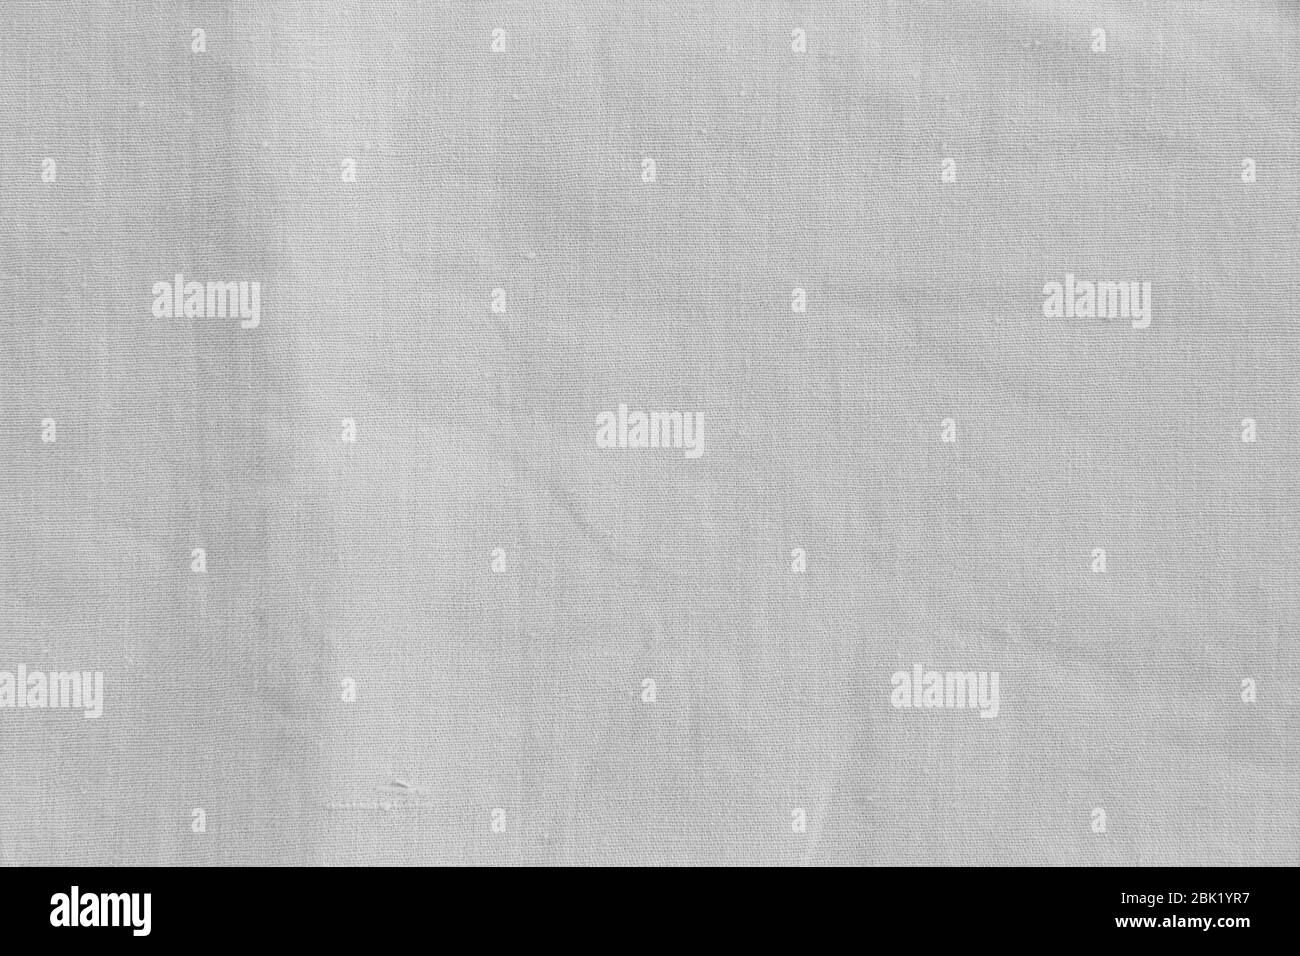 White linen texture Black and White Stock Photos & Images - Alamy